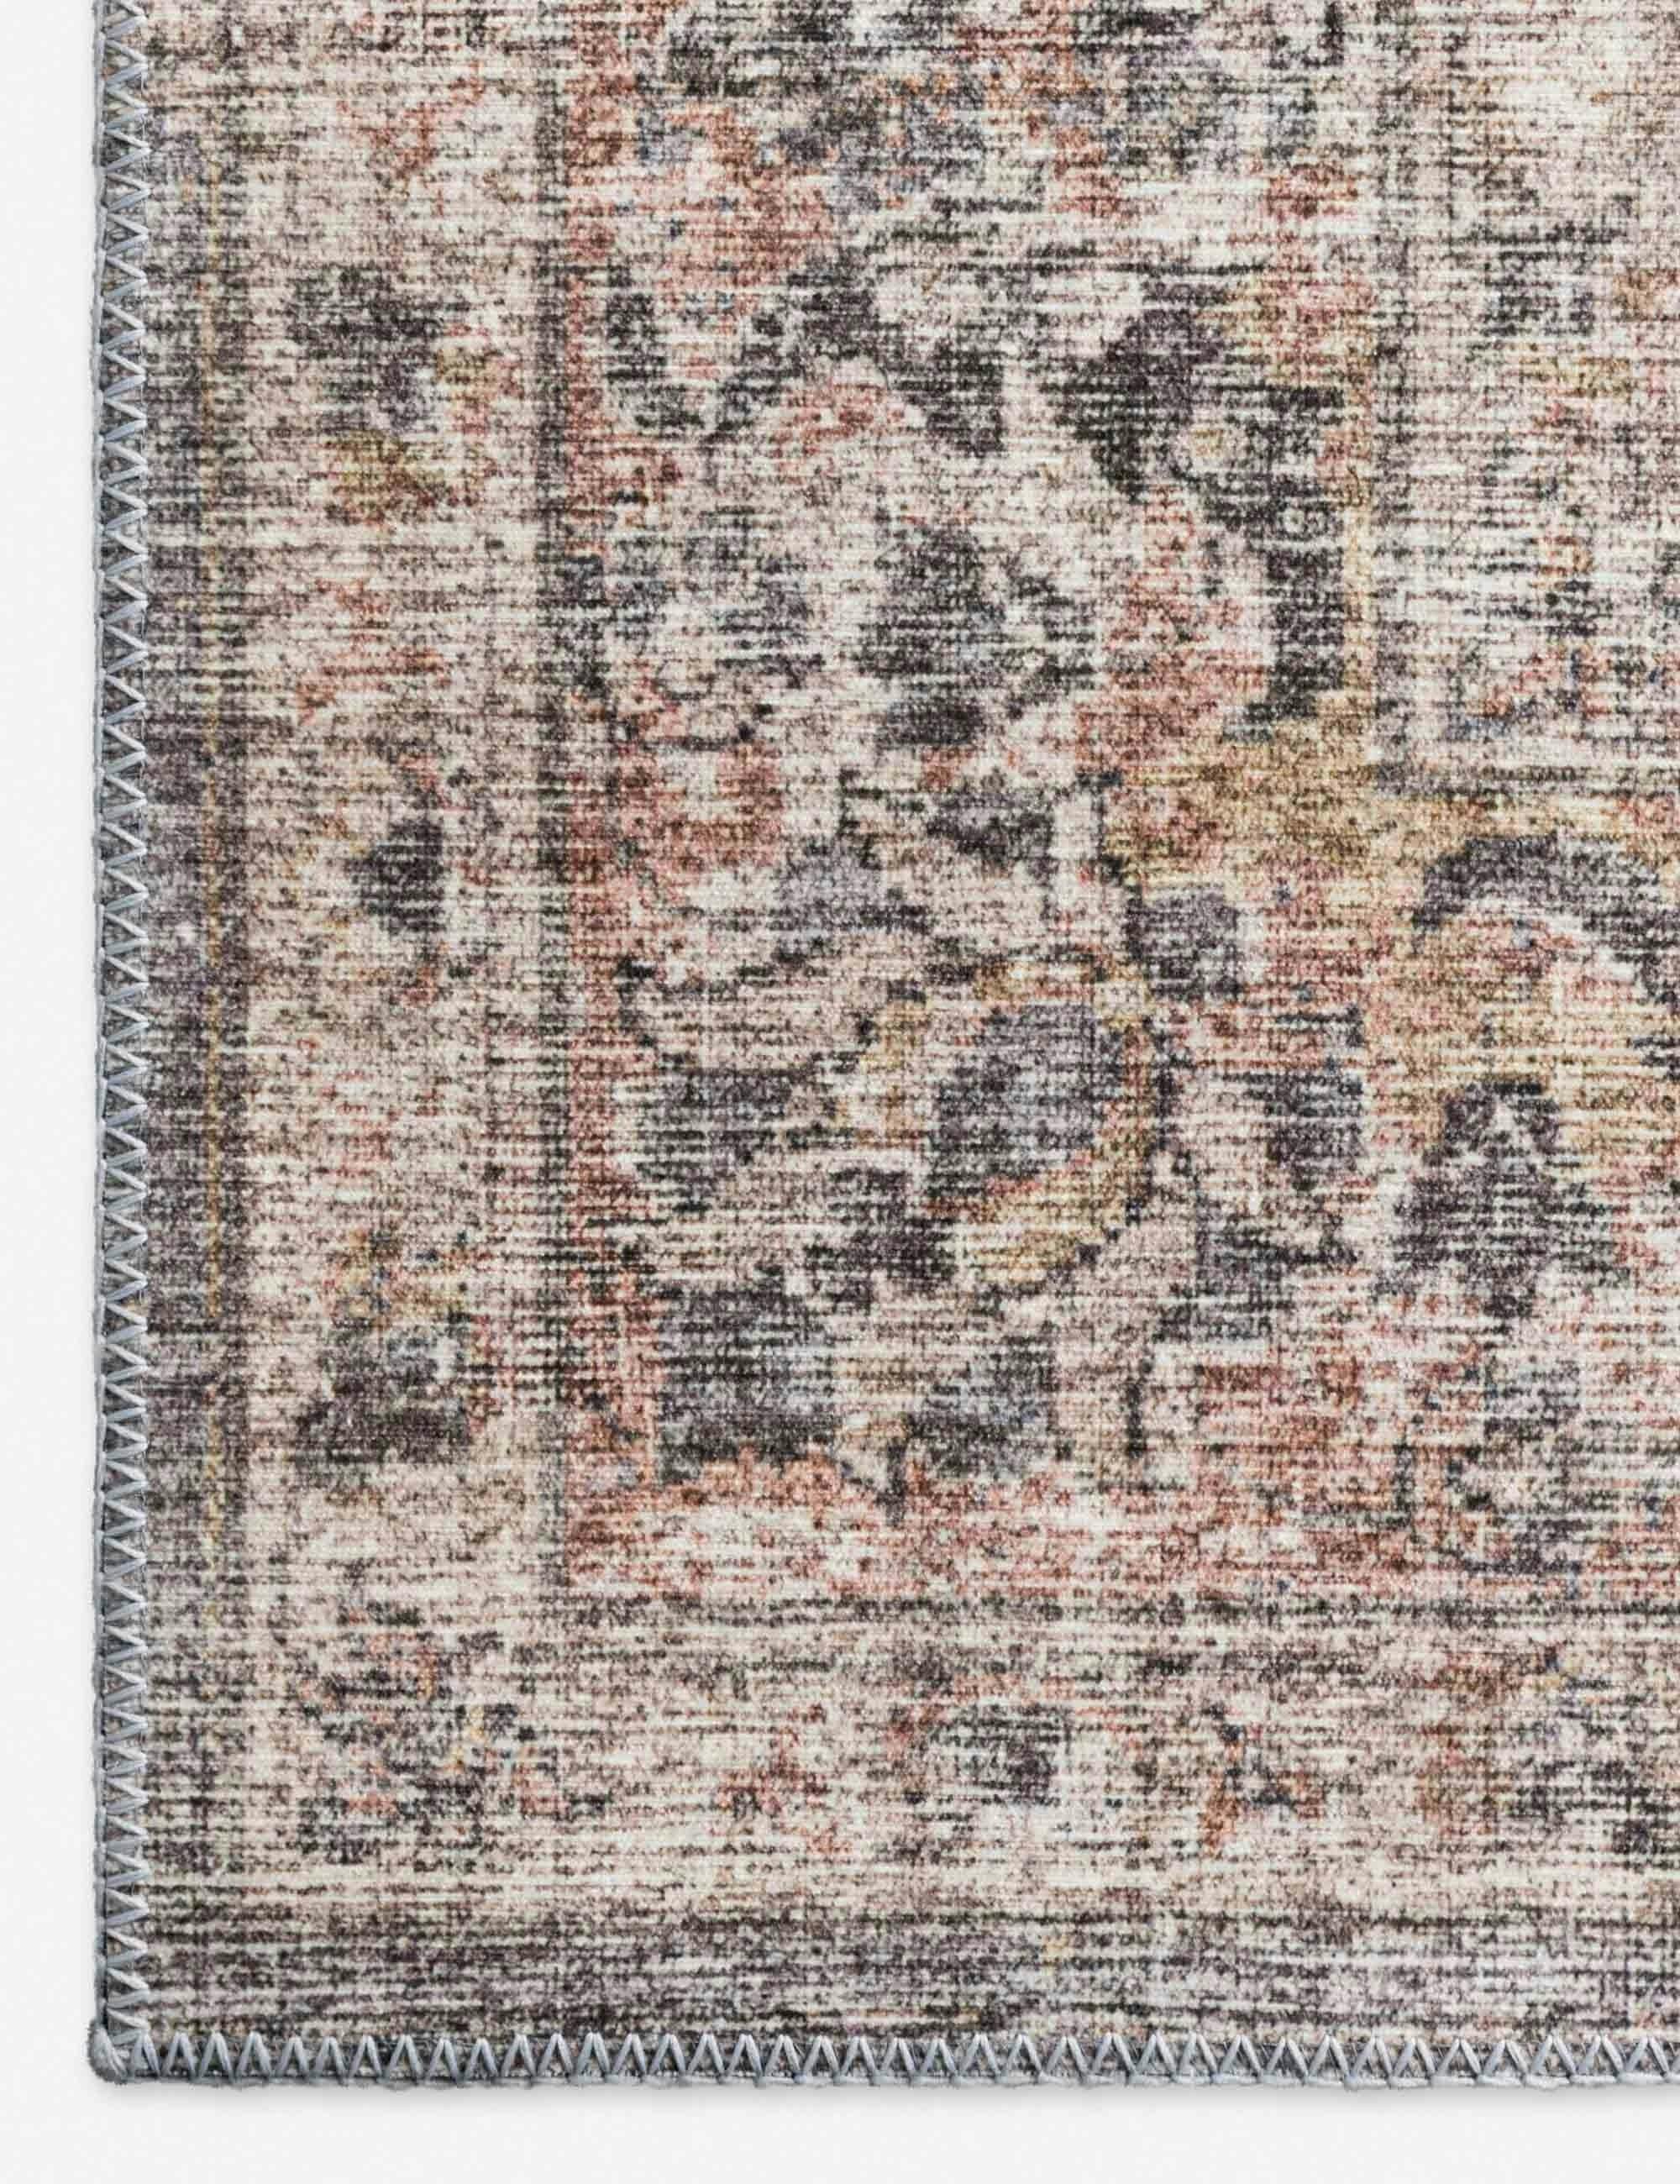 Vintage Inspired Grey and Apricot Oriental Area Rug - 5' x 7'